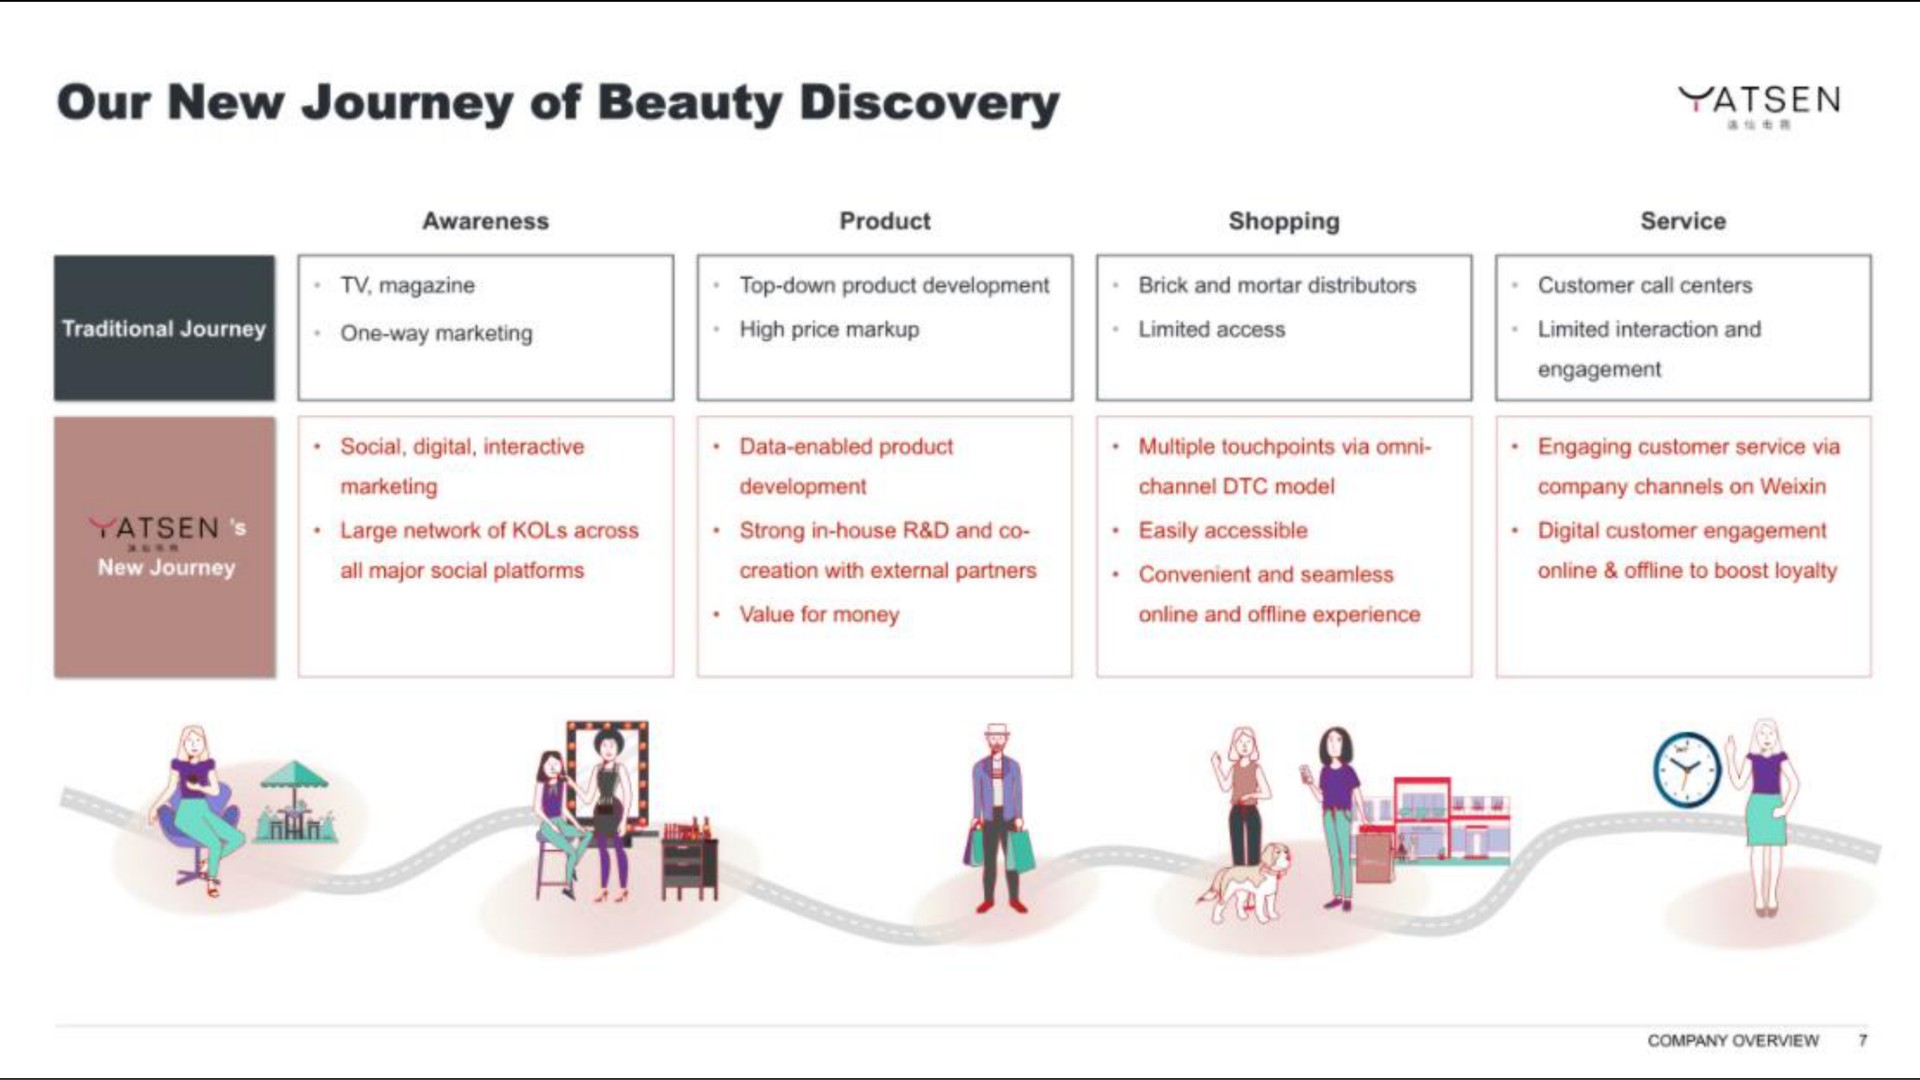 our new journey of beauty discovery | Yatsen